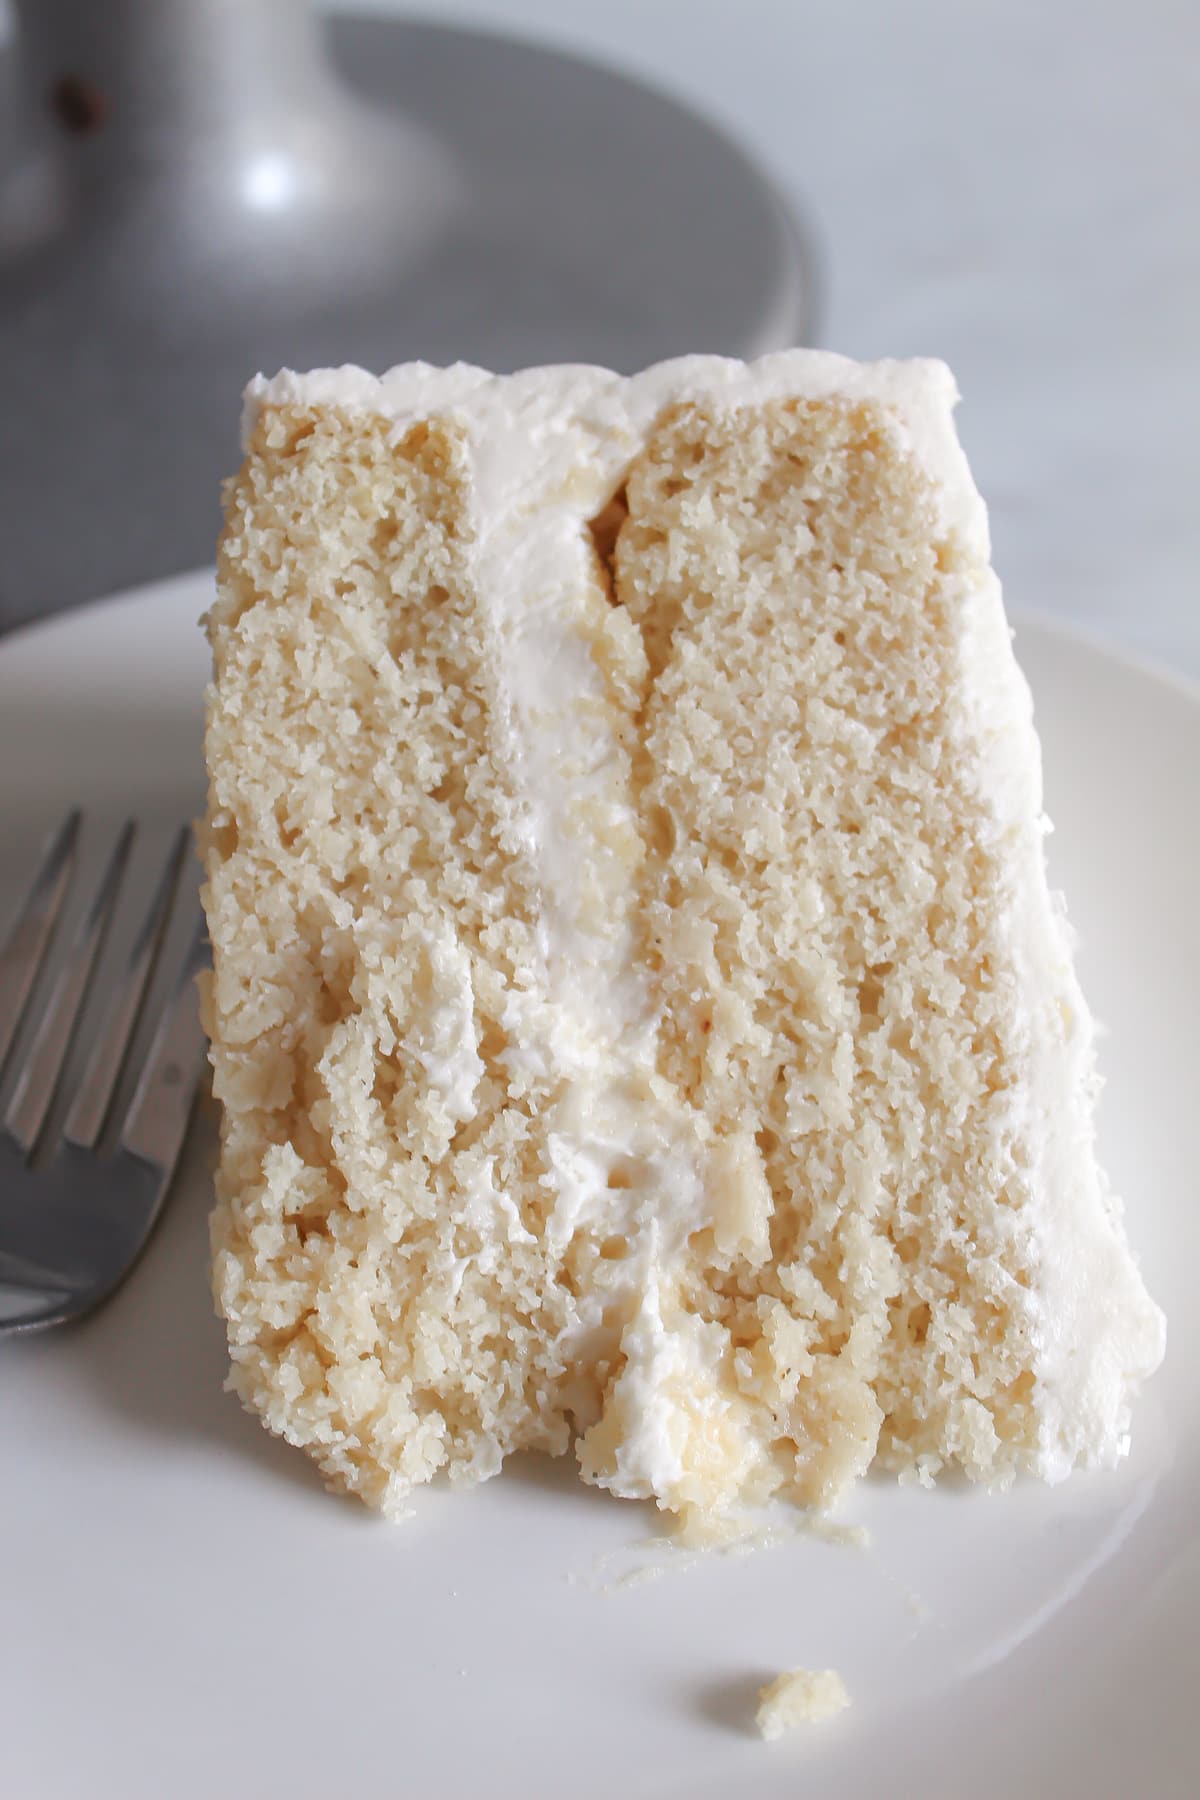 slice of gluten-free white cake with frosting.